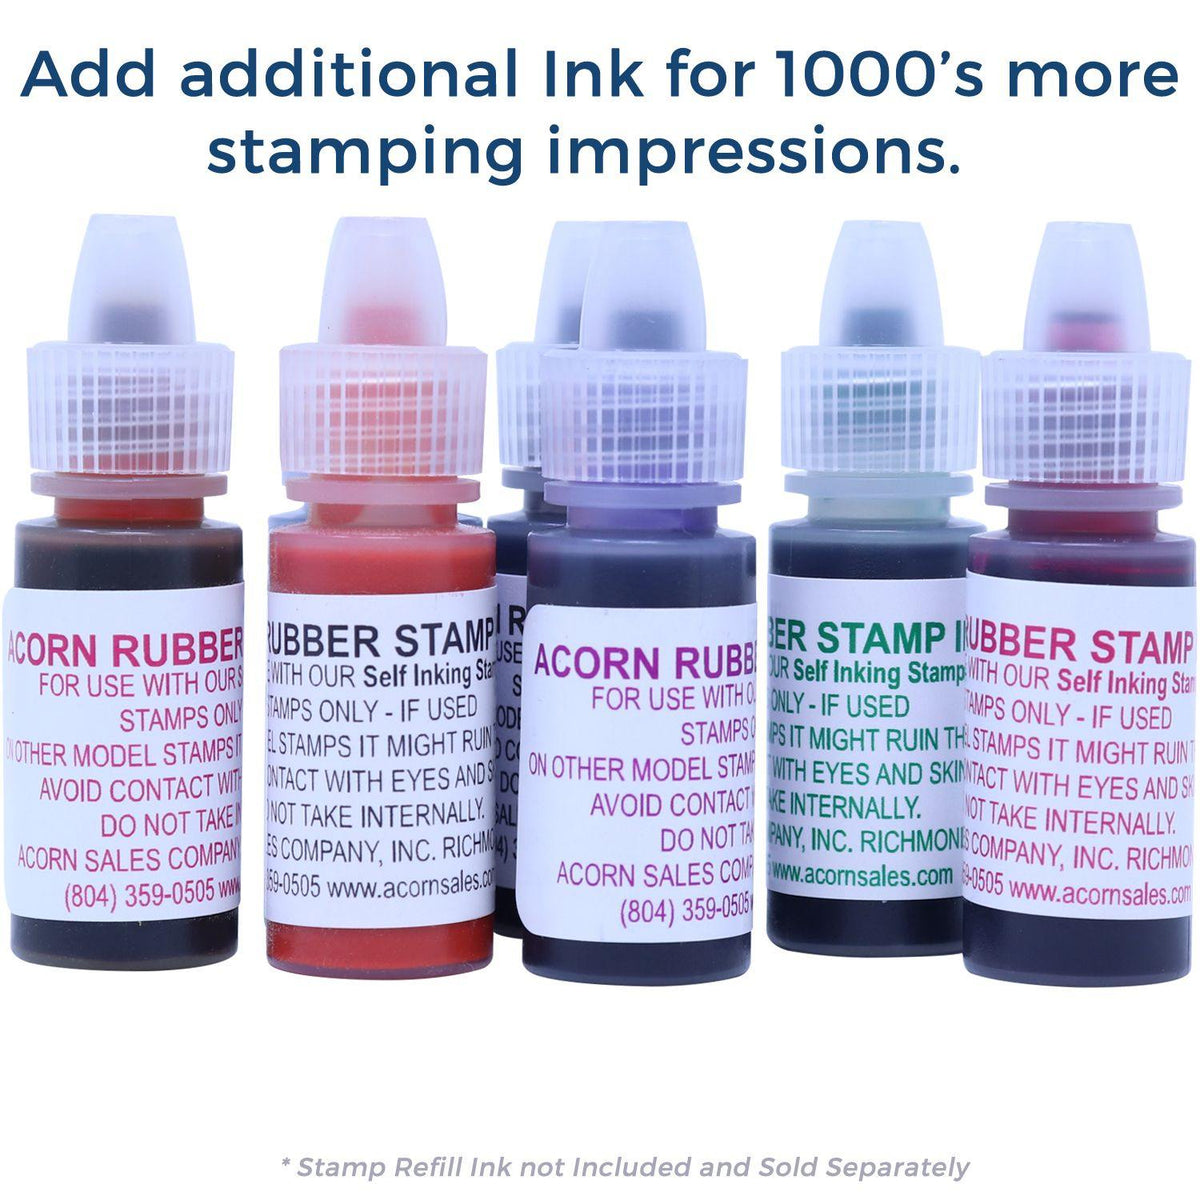 Refill Inks for Slim Pre-Inked Credito Stamp Available